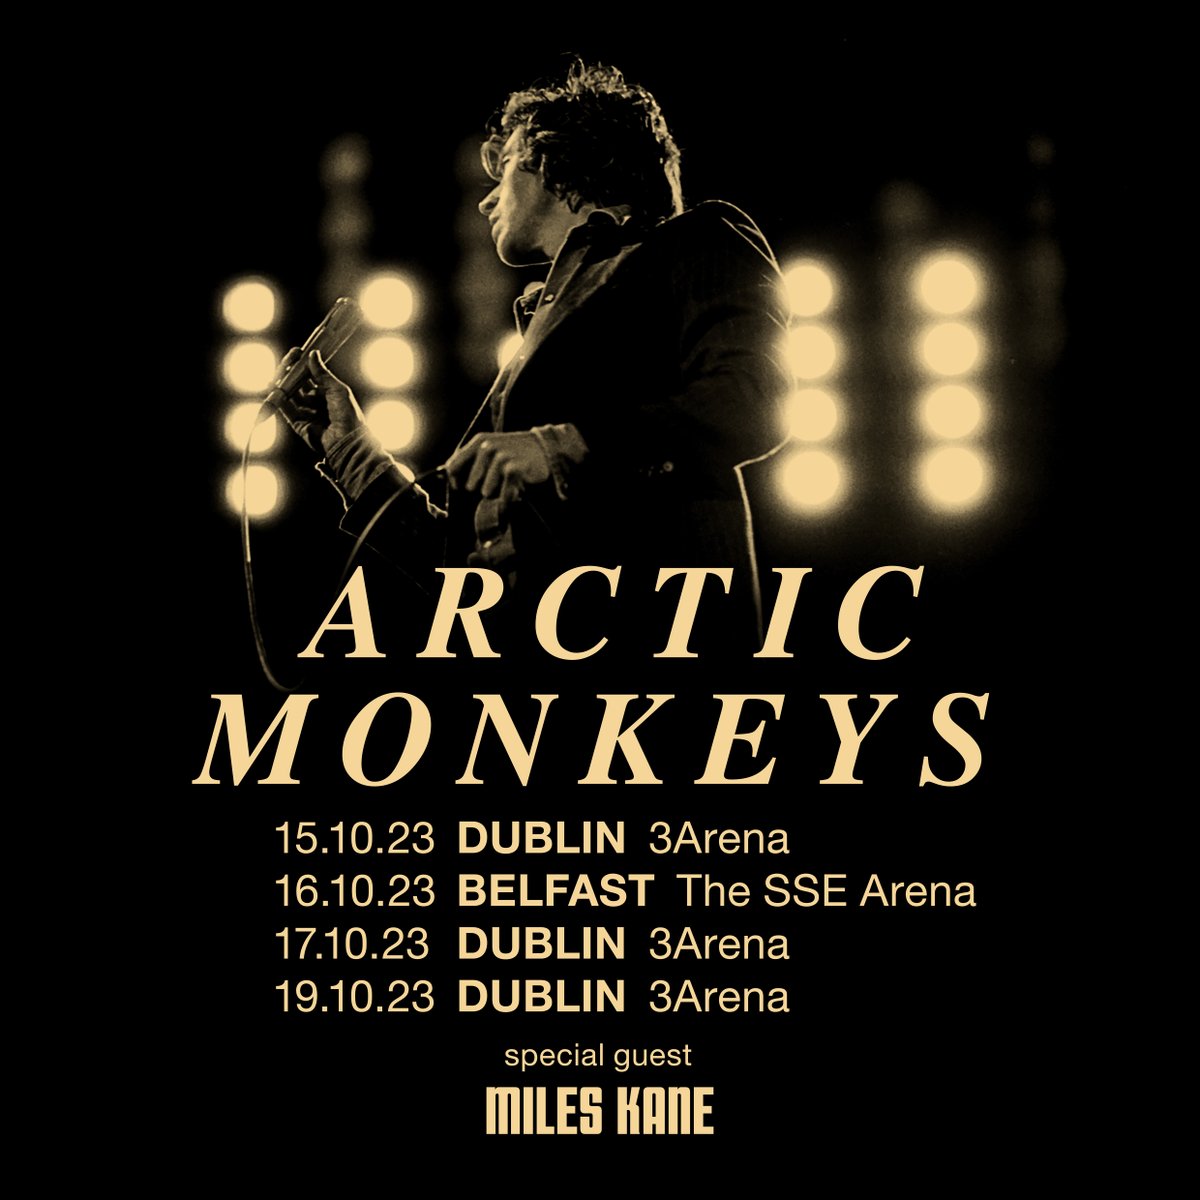 Arctic Monkeys will be returning to Dublin & Belfast in October 2023 for a series of arena dates to mark the end of their World Tour. The band are pleased to announce @MilesKaneMusic as Special Guest. These dates follow the cancellation of the band’s summer show at Dublin’s…